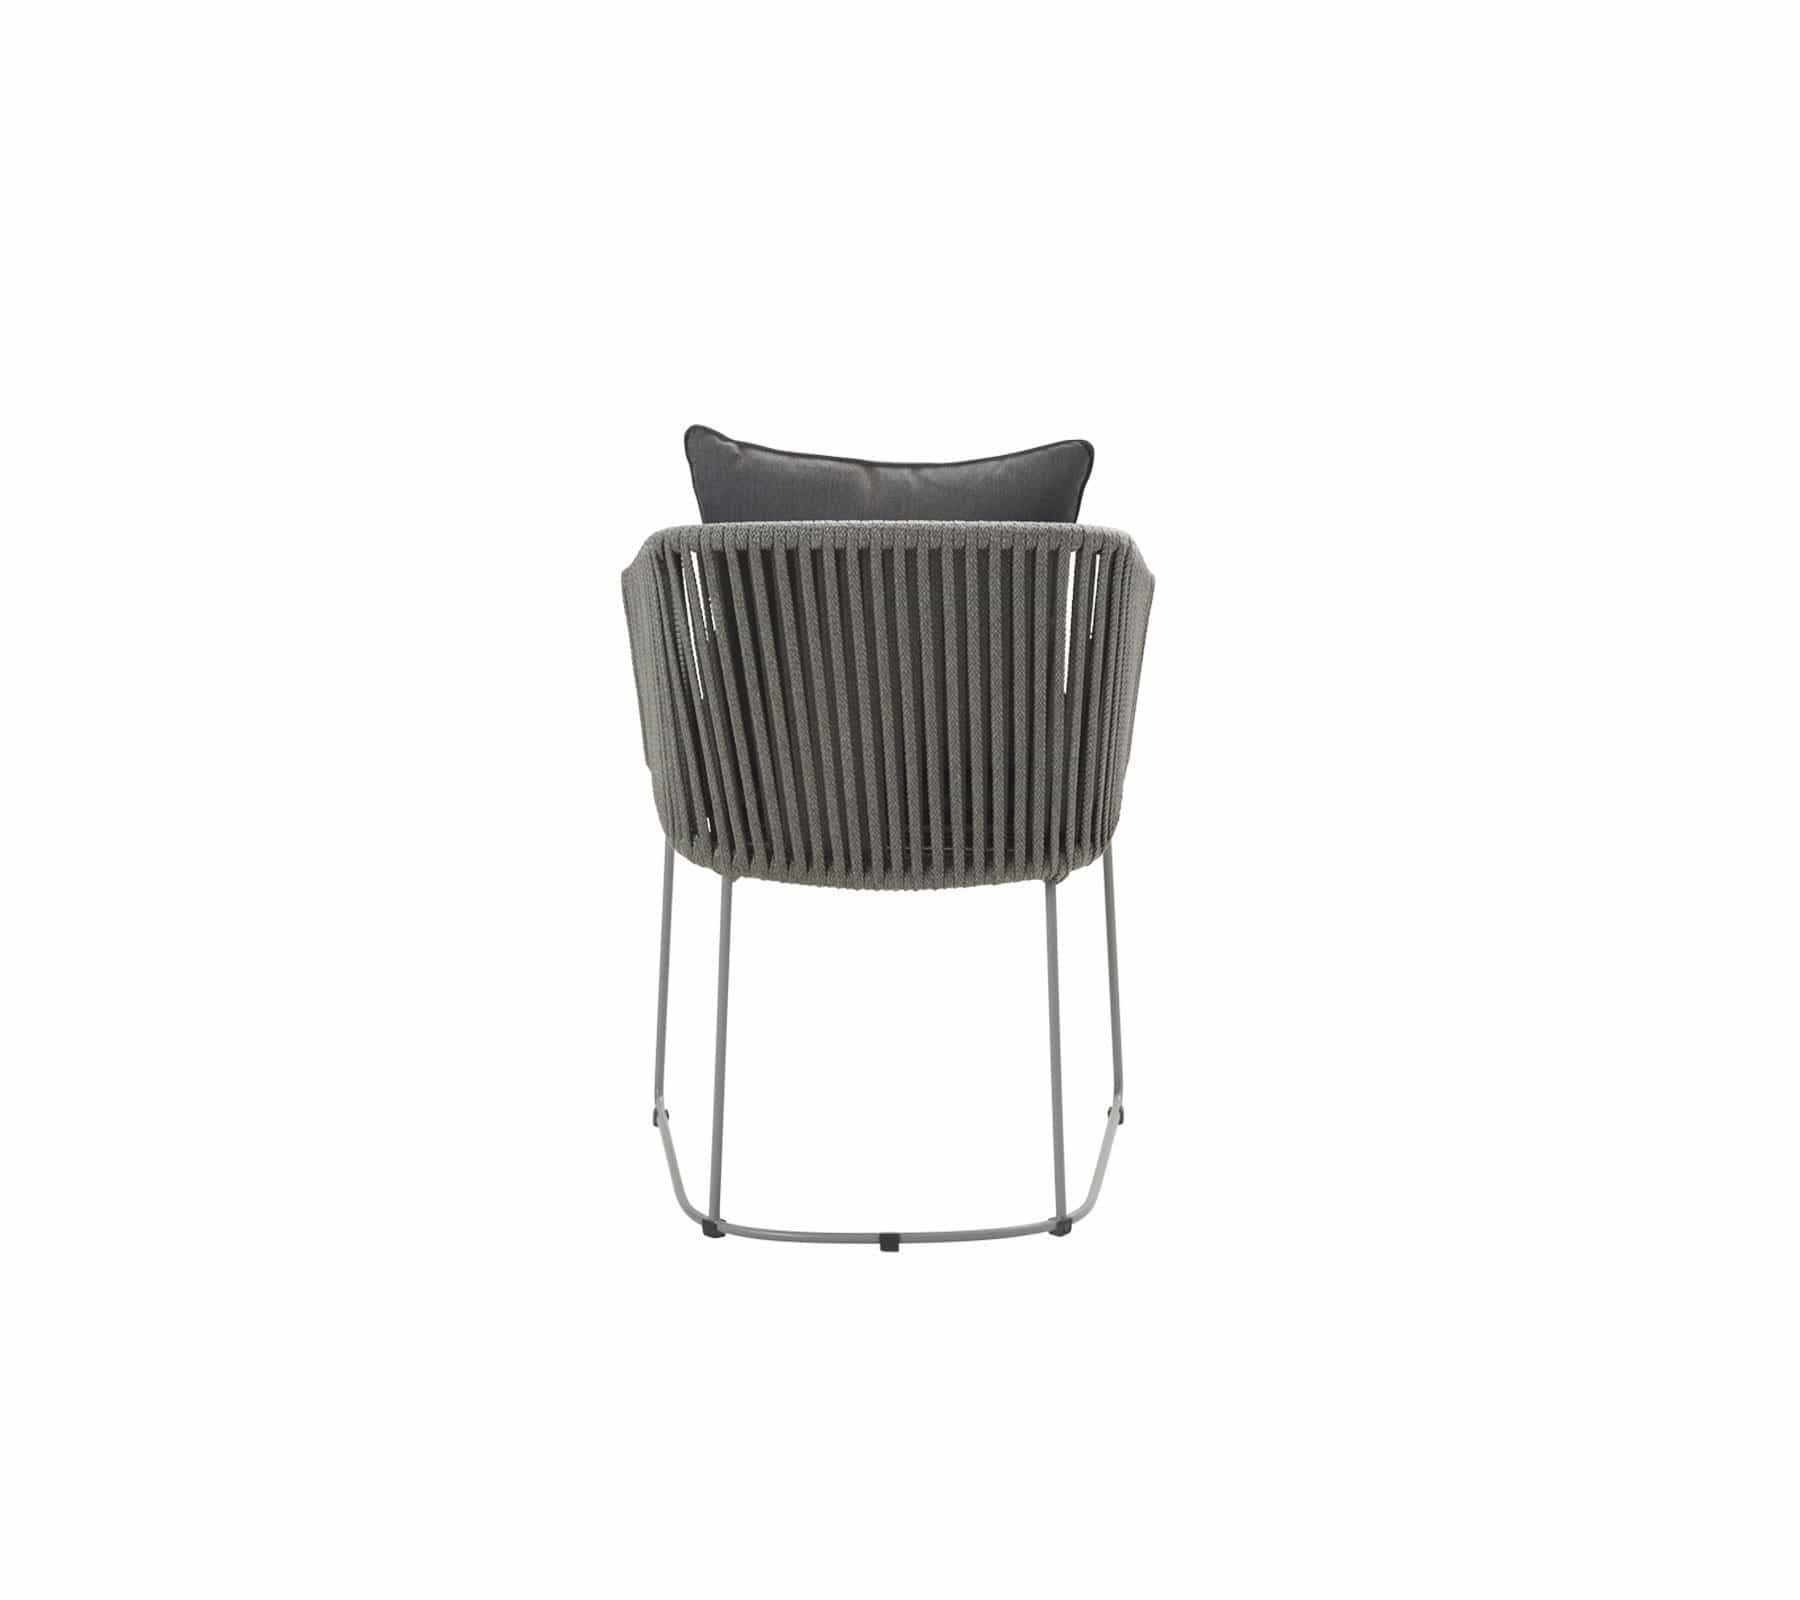 Cane-Line Denmark Outdoor Chairs Cane-Line Moments chair  7441ROG